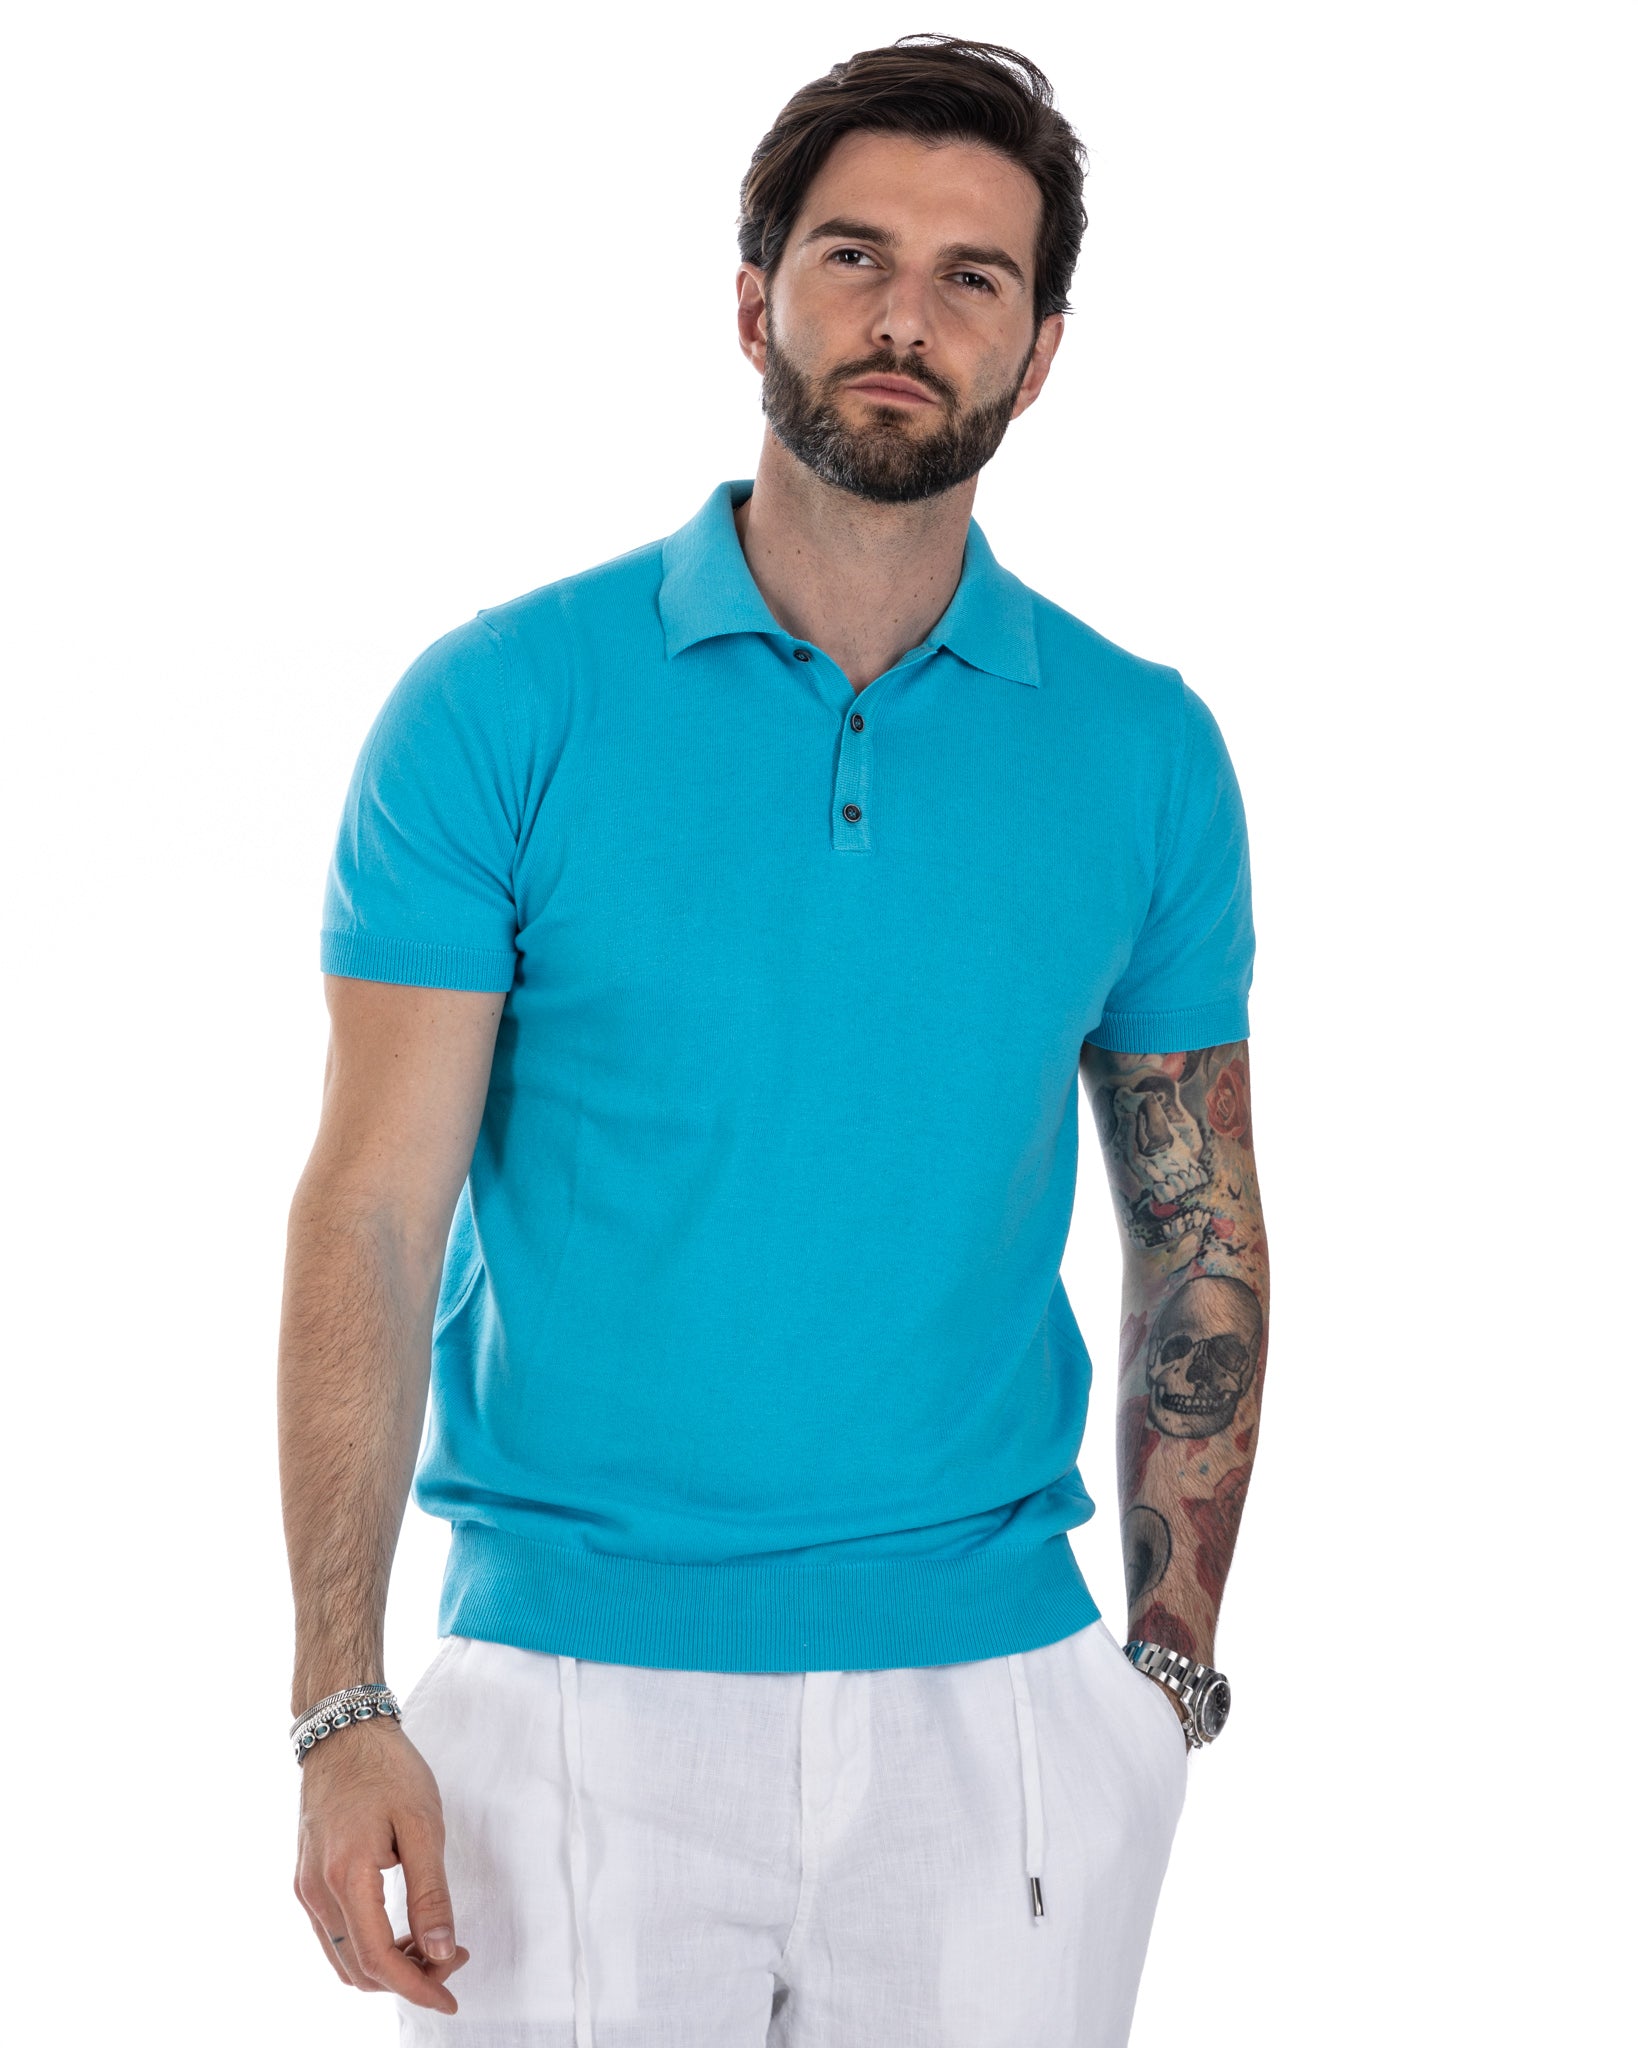 Roger - turquoise knitted polo